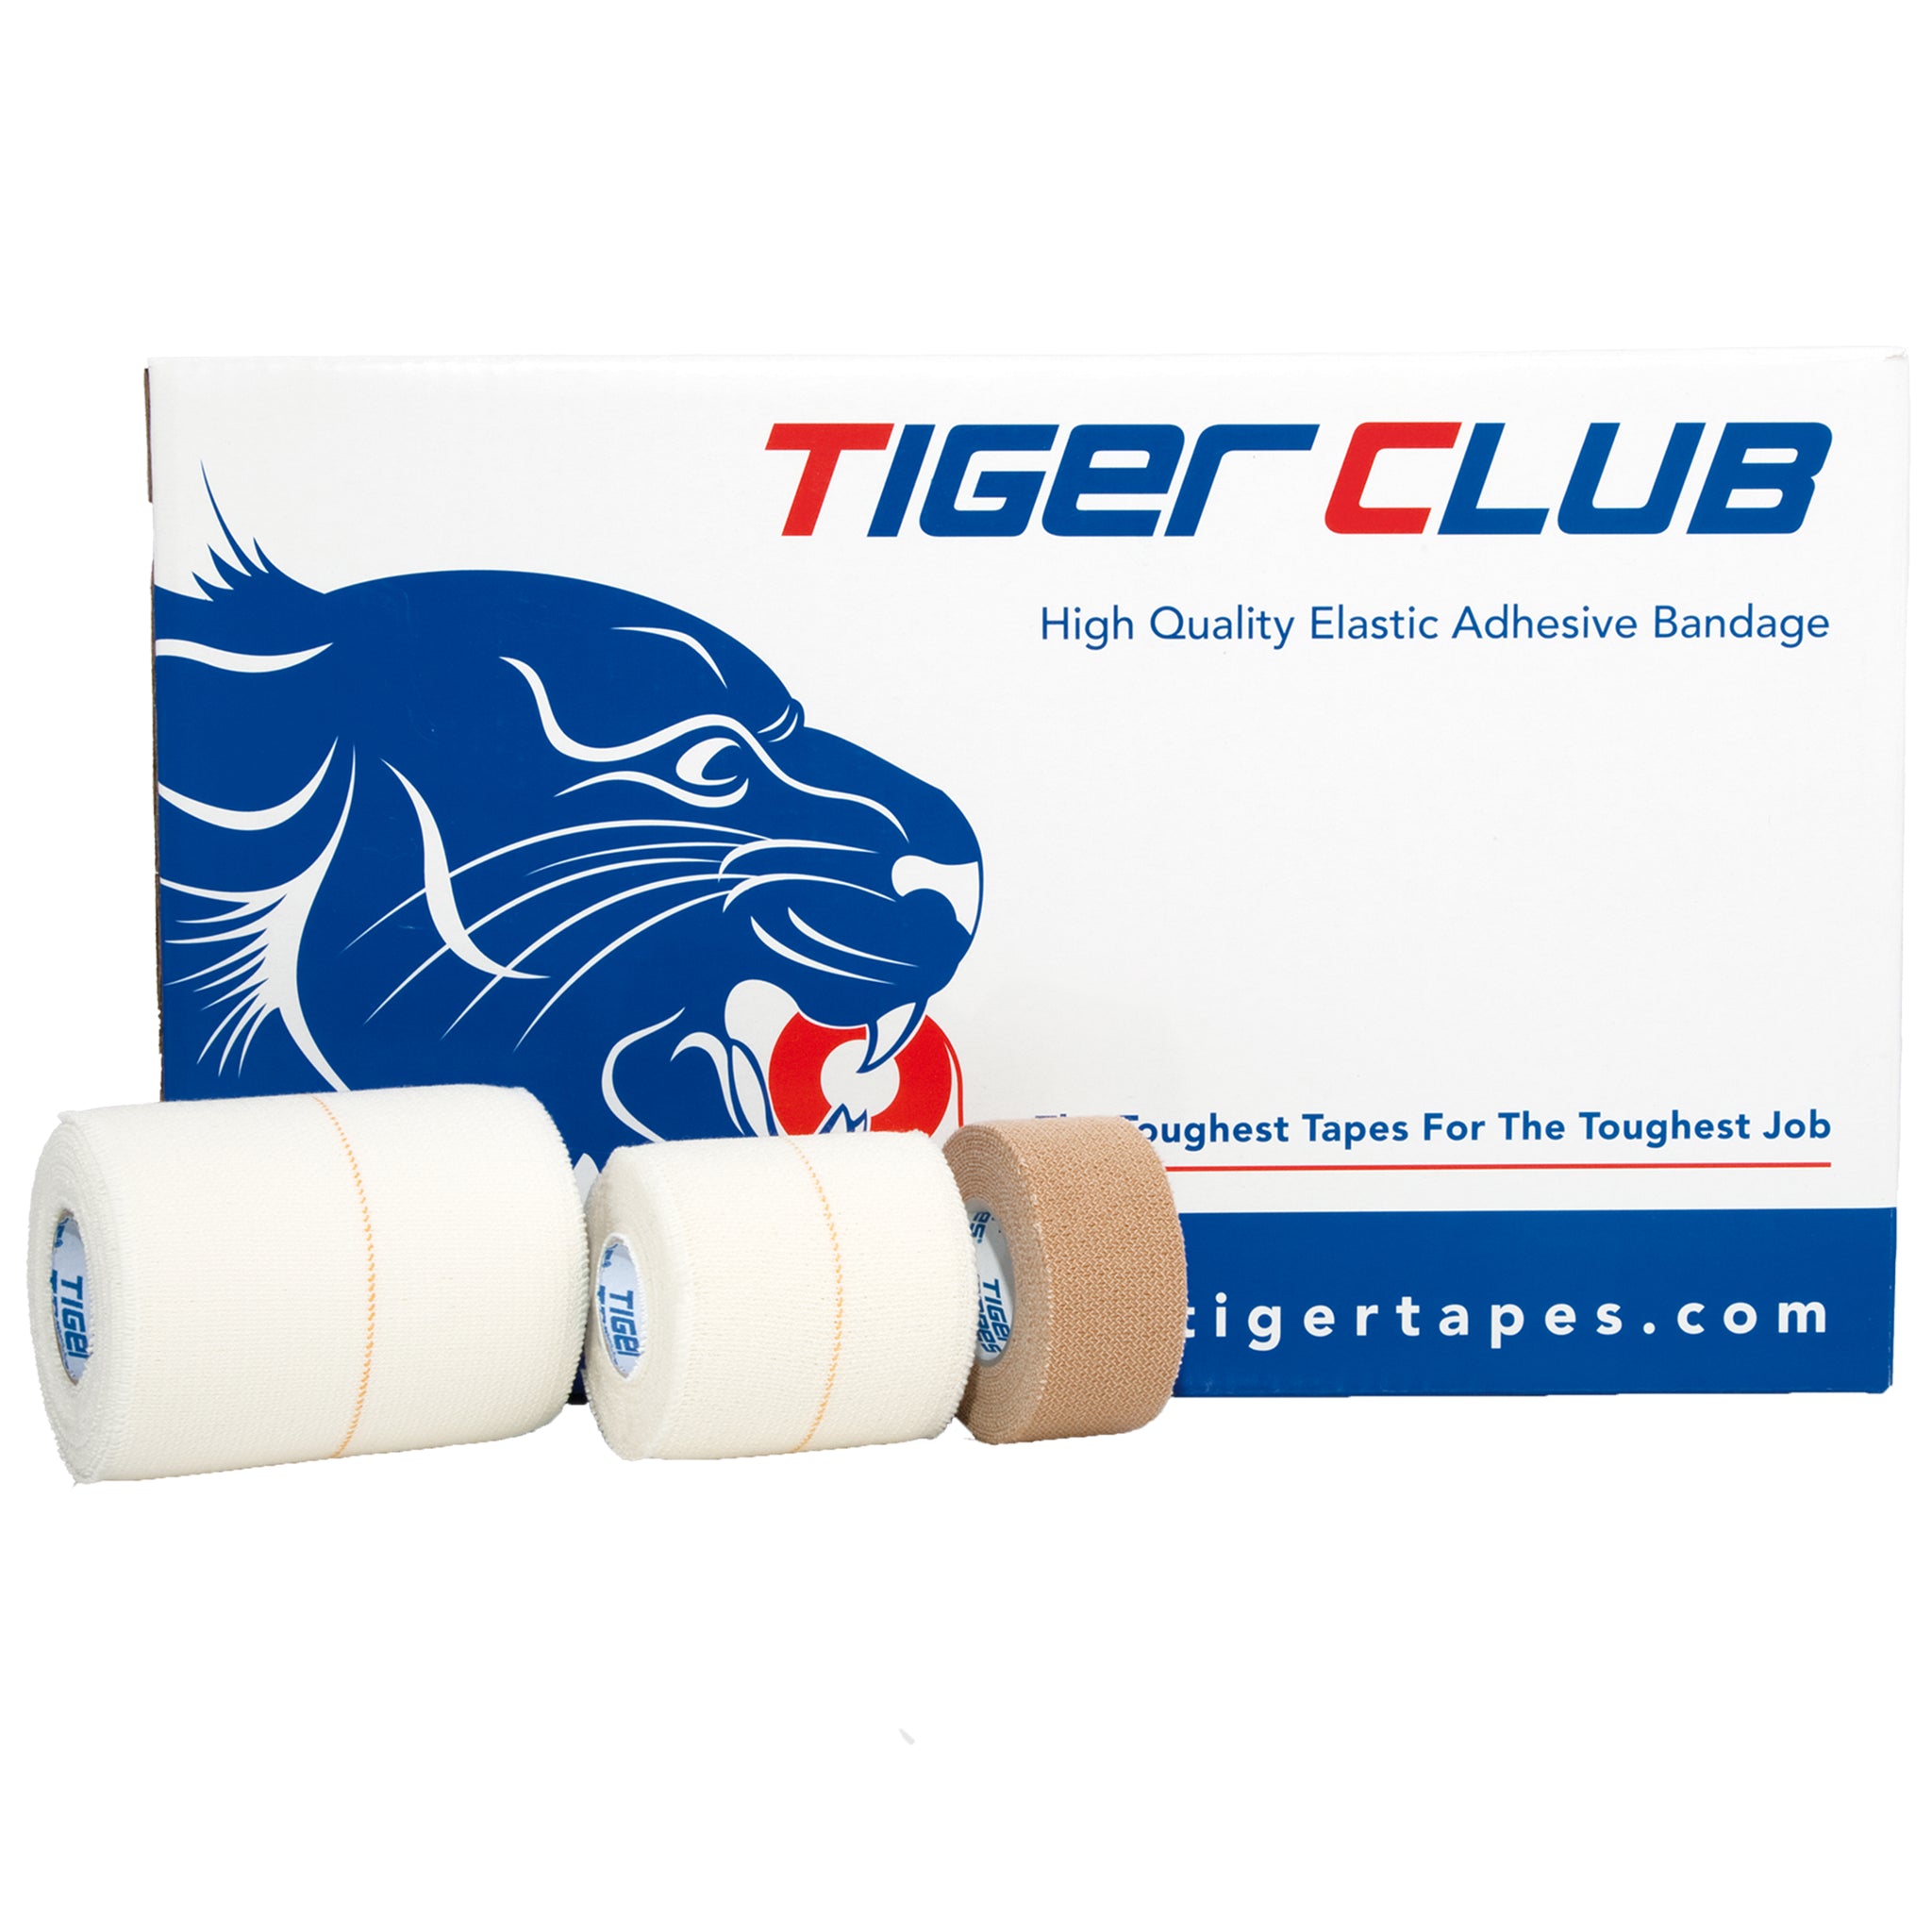 Tiger Tape Club Pro - Smooth, Superior EAB from Physique